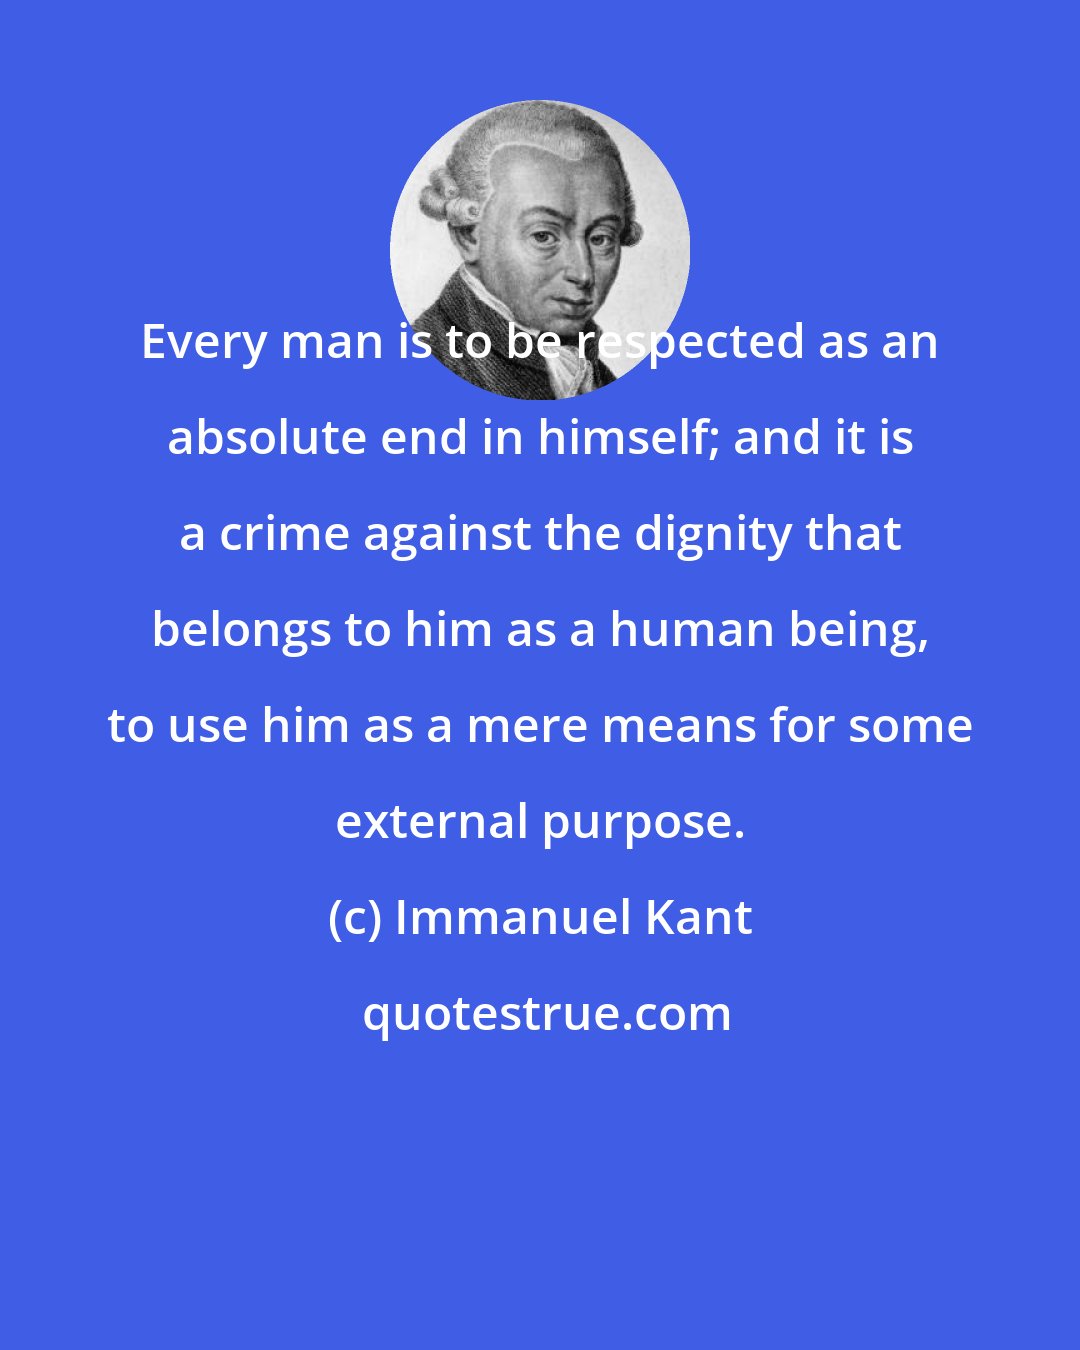 Immanuel Kant: Every man is to be respected as an absolute end in himself; and it is a crime against the dignity that belongs to him as a human being, to use him as a mere means for some external purpose.